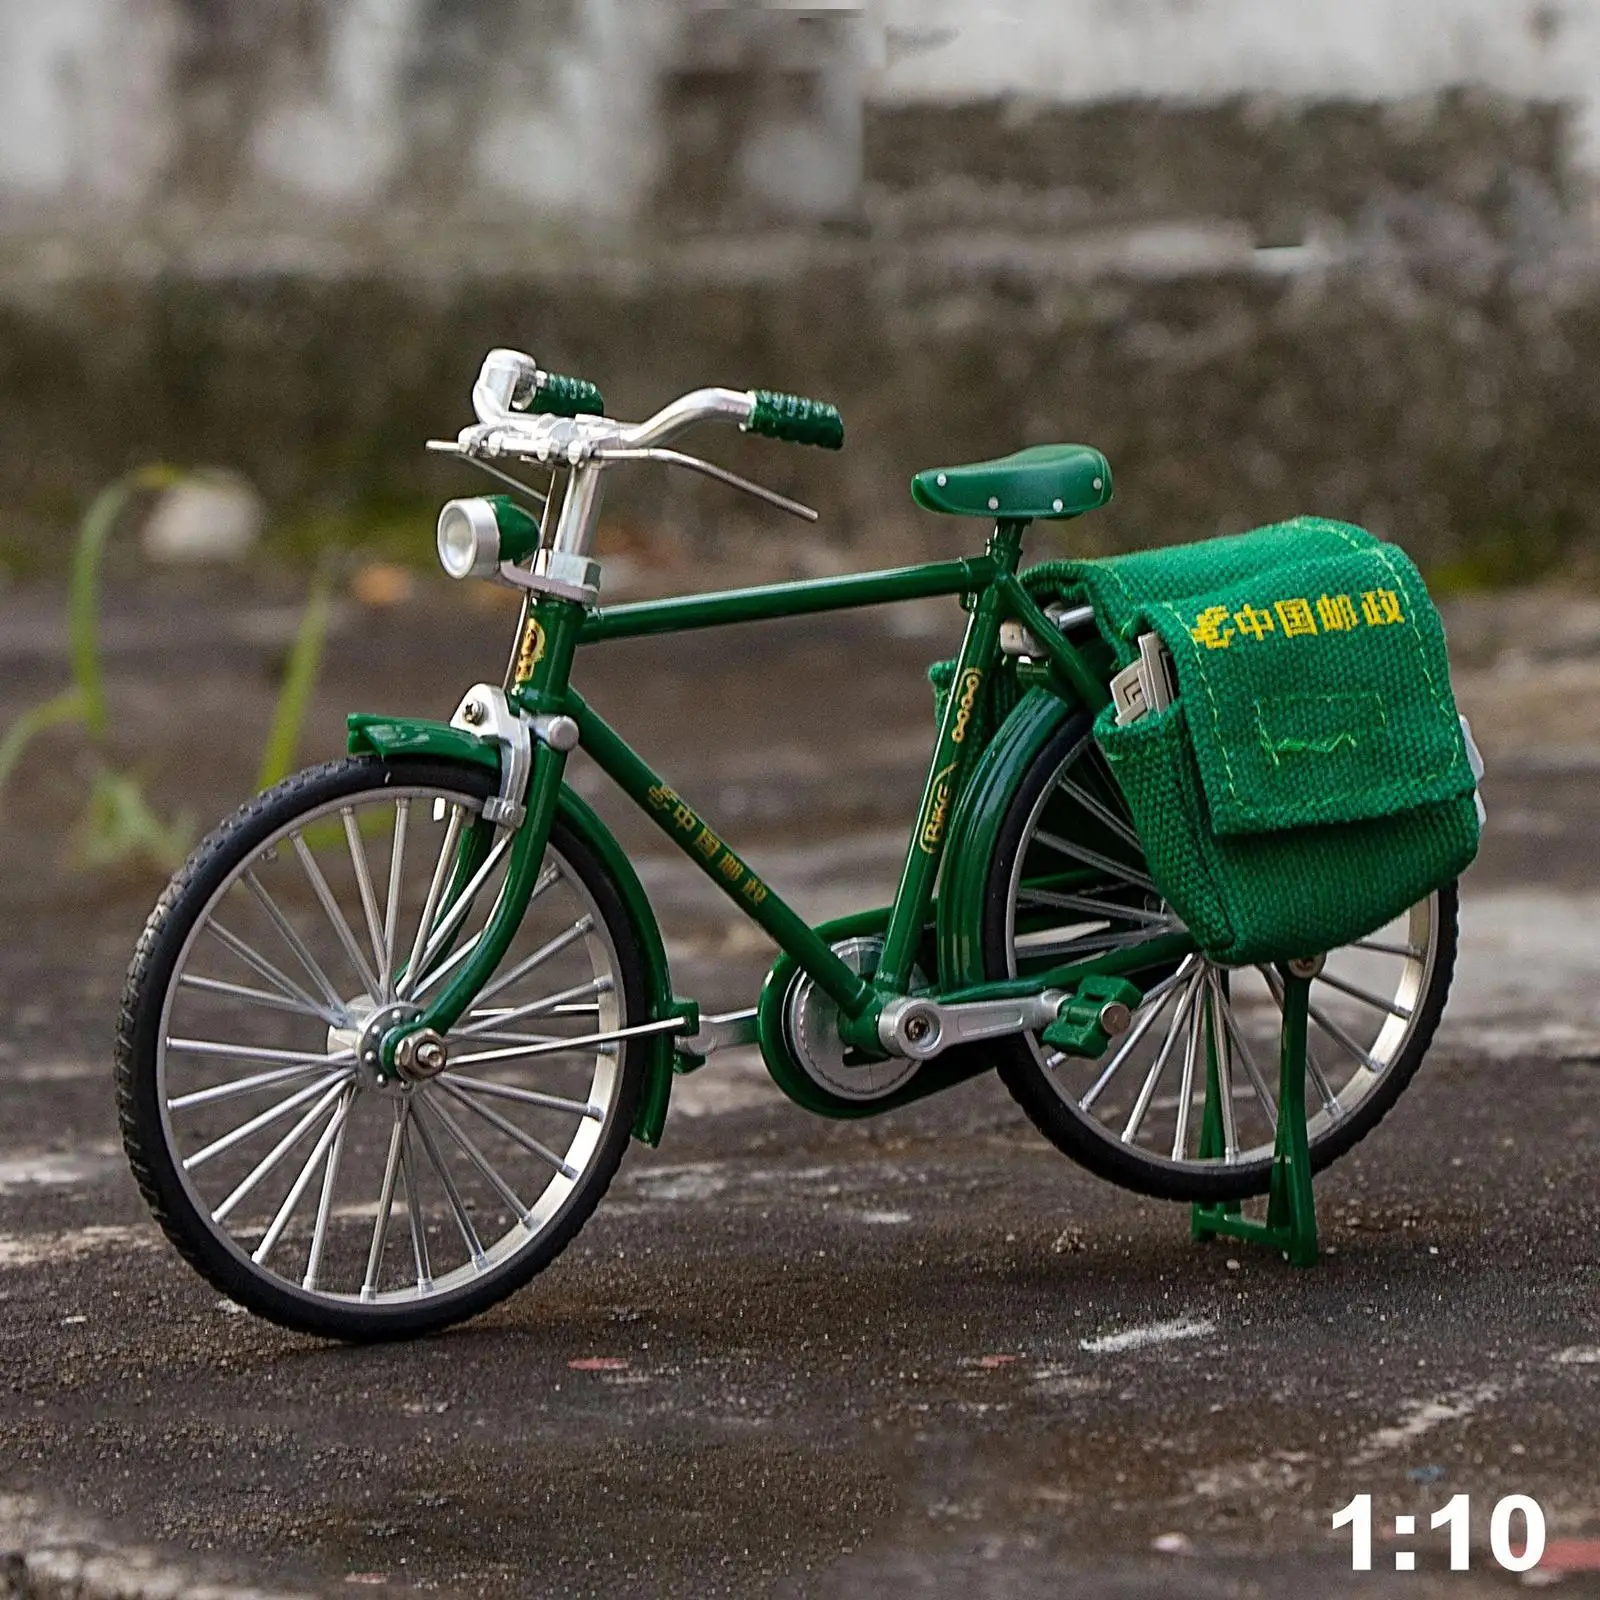 1:10 Bicycle Model Ornaments Handicraft Creative Vintage Style Miniature China Post Bike Toy for Office Girls Boys Children Kids